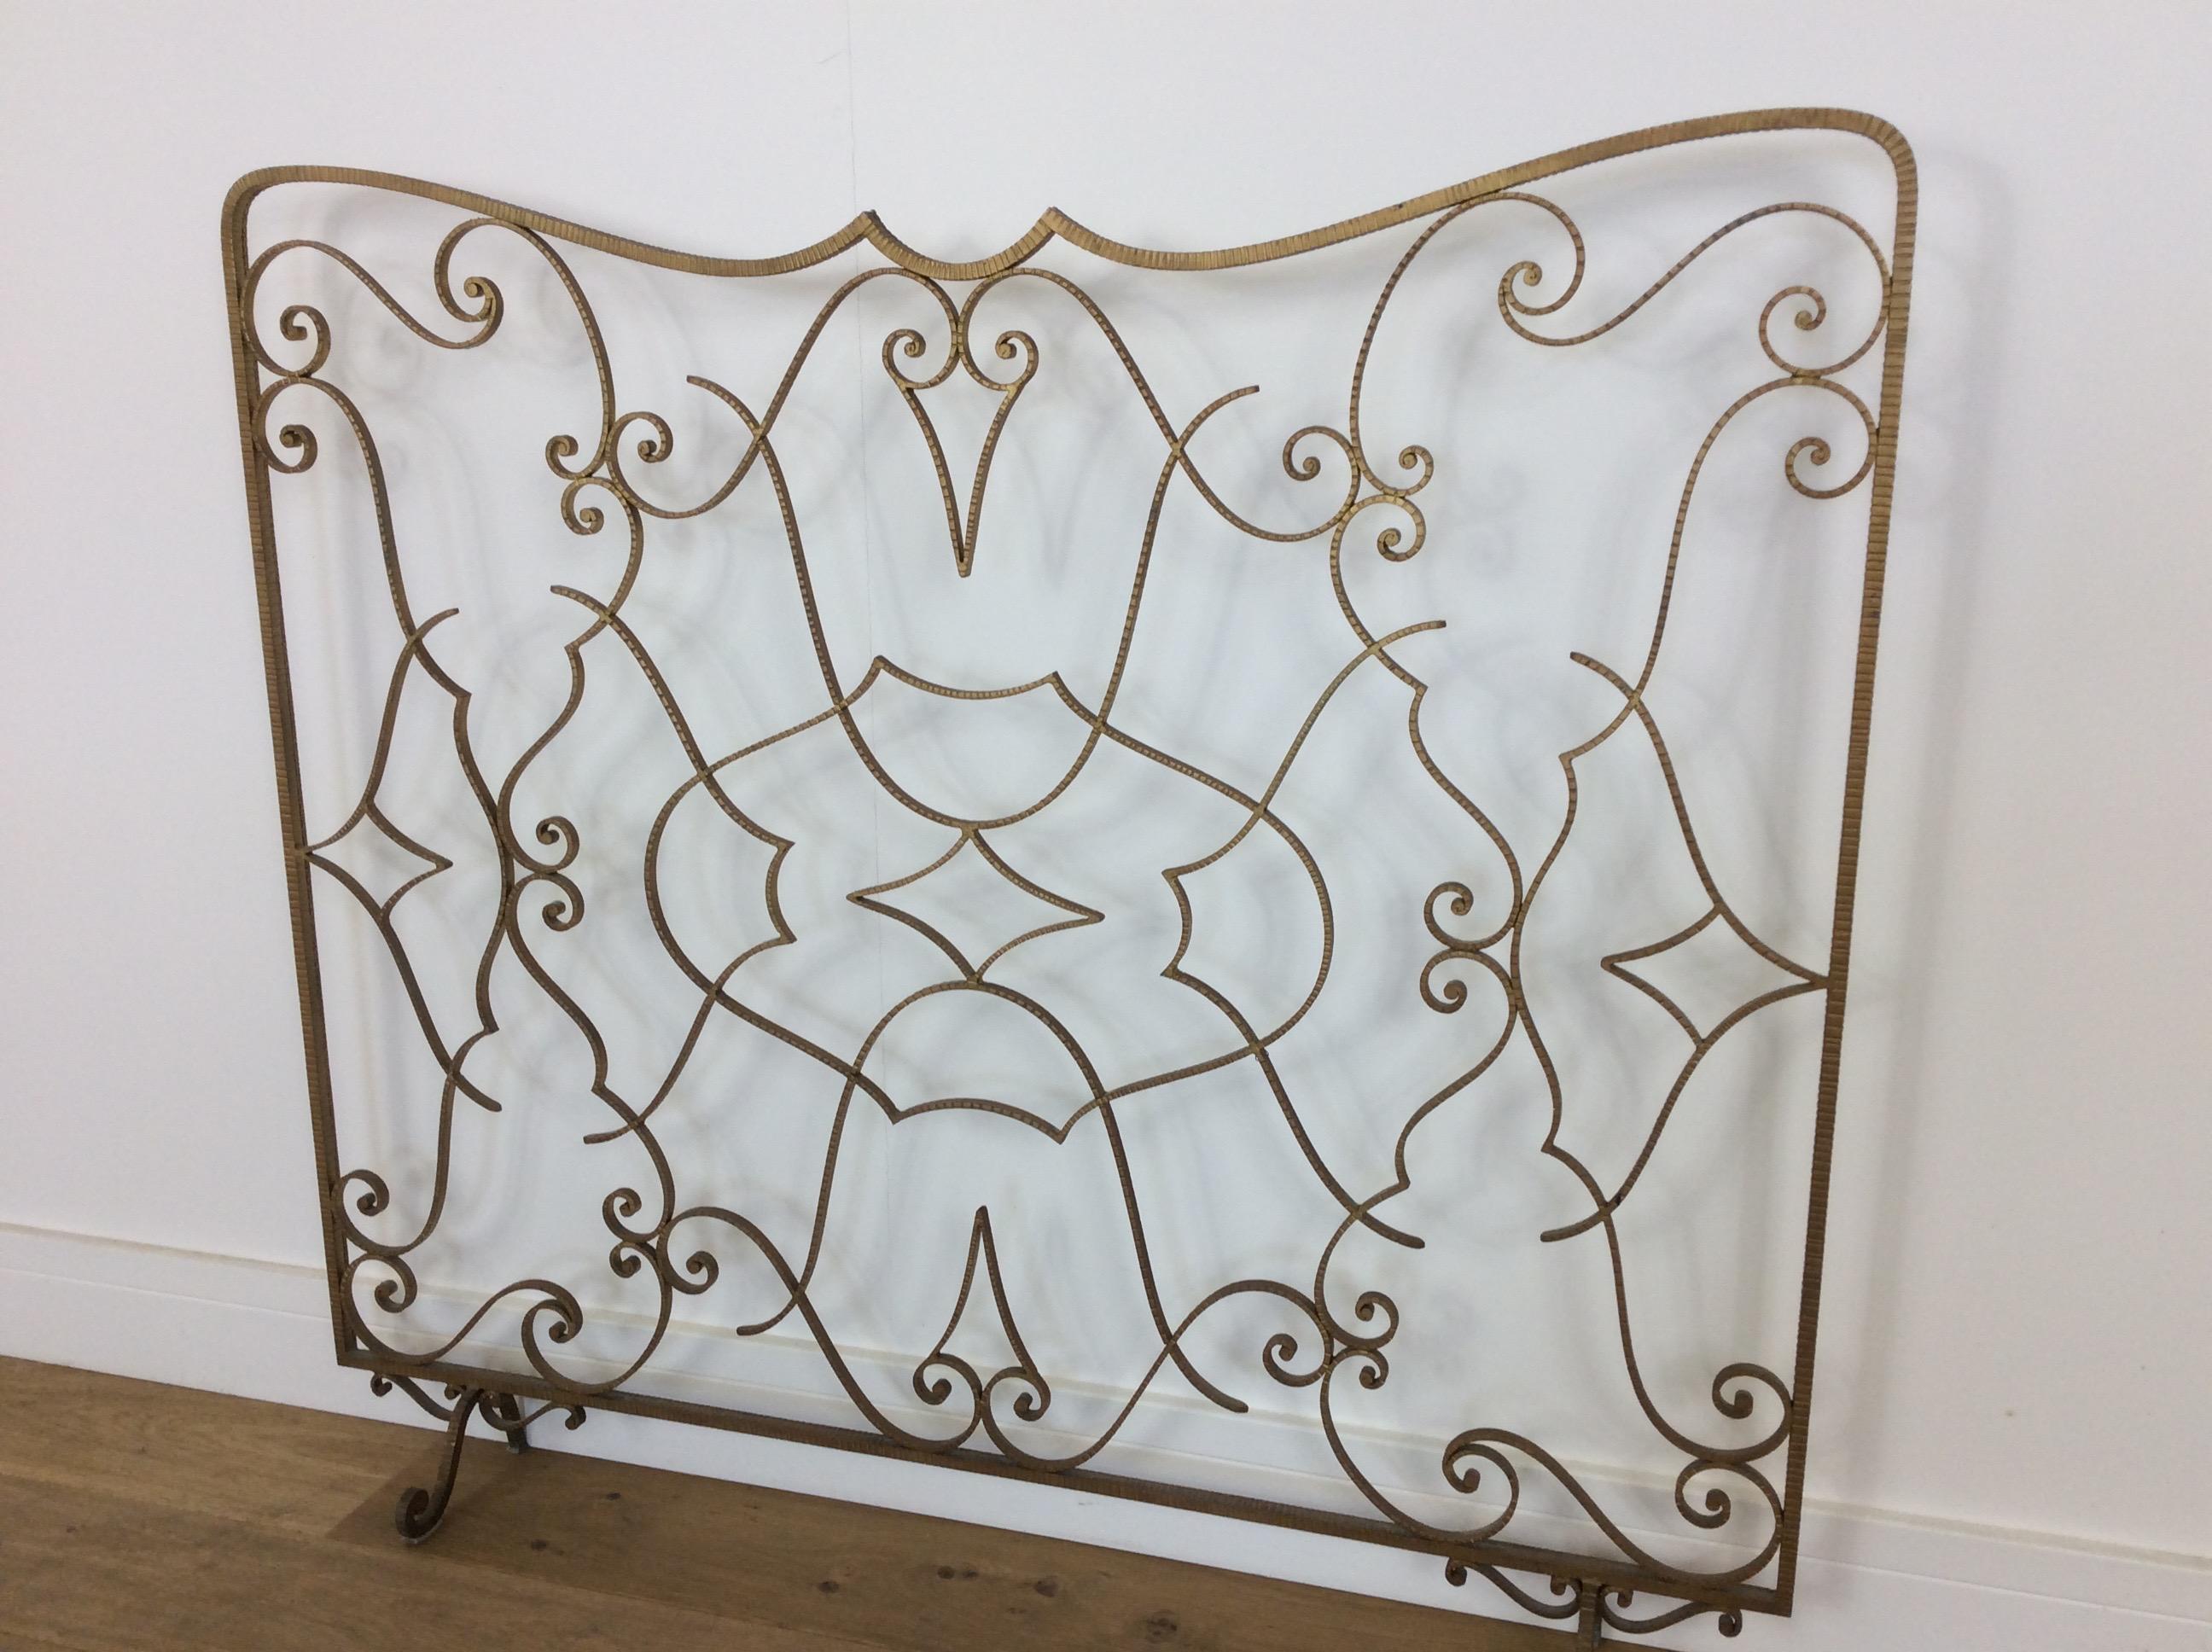 Large Art Deco fire screen.
Gold sprayed wrought iron, with what looks like a figural design.
Measures: 99 cm H, 111 cm W
French, circa 1930.